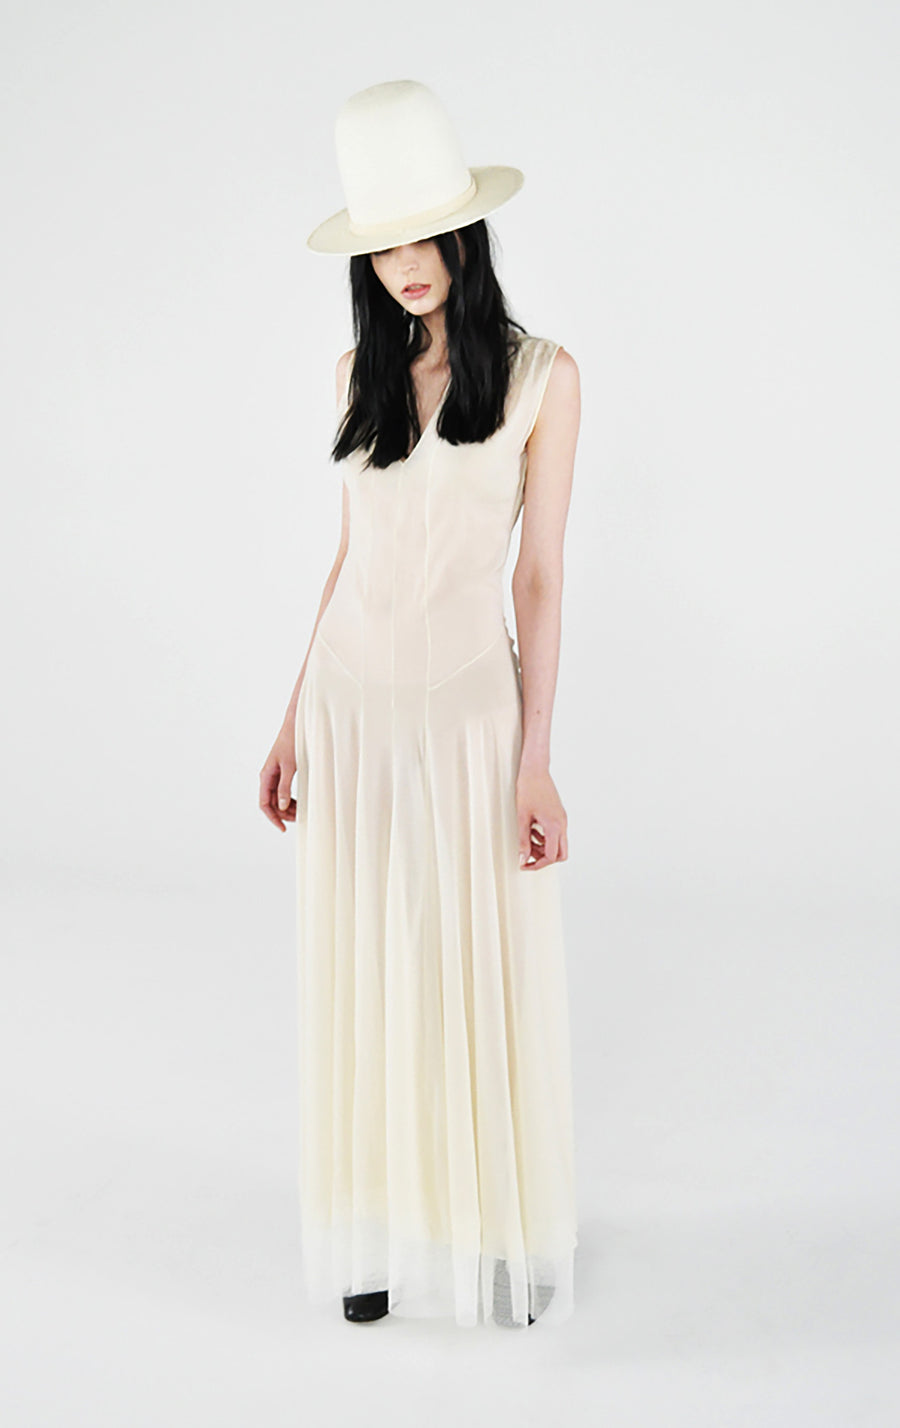 cream ivory white silk chiffon Victorian slip dress Wendy Nichol Fashion clothing designer runway SS13 sleeveless v neck lace trim sheer vintage Victorian slip dress bride bridal wedding straw El topo high crown hat Handmade in NYC New York City Custom color fabric made to Measure tailor tailoring fitted